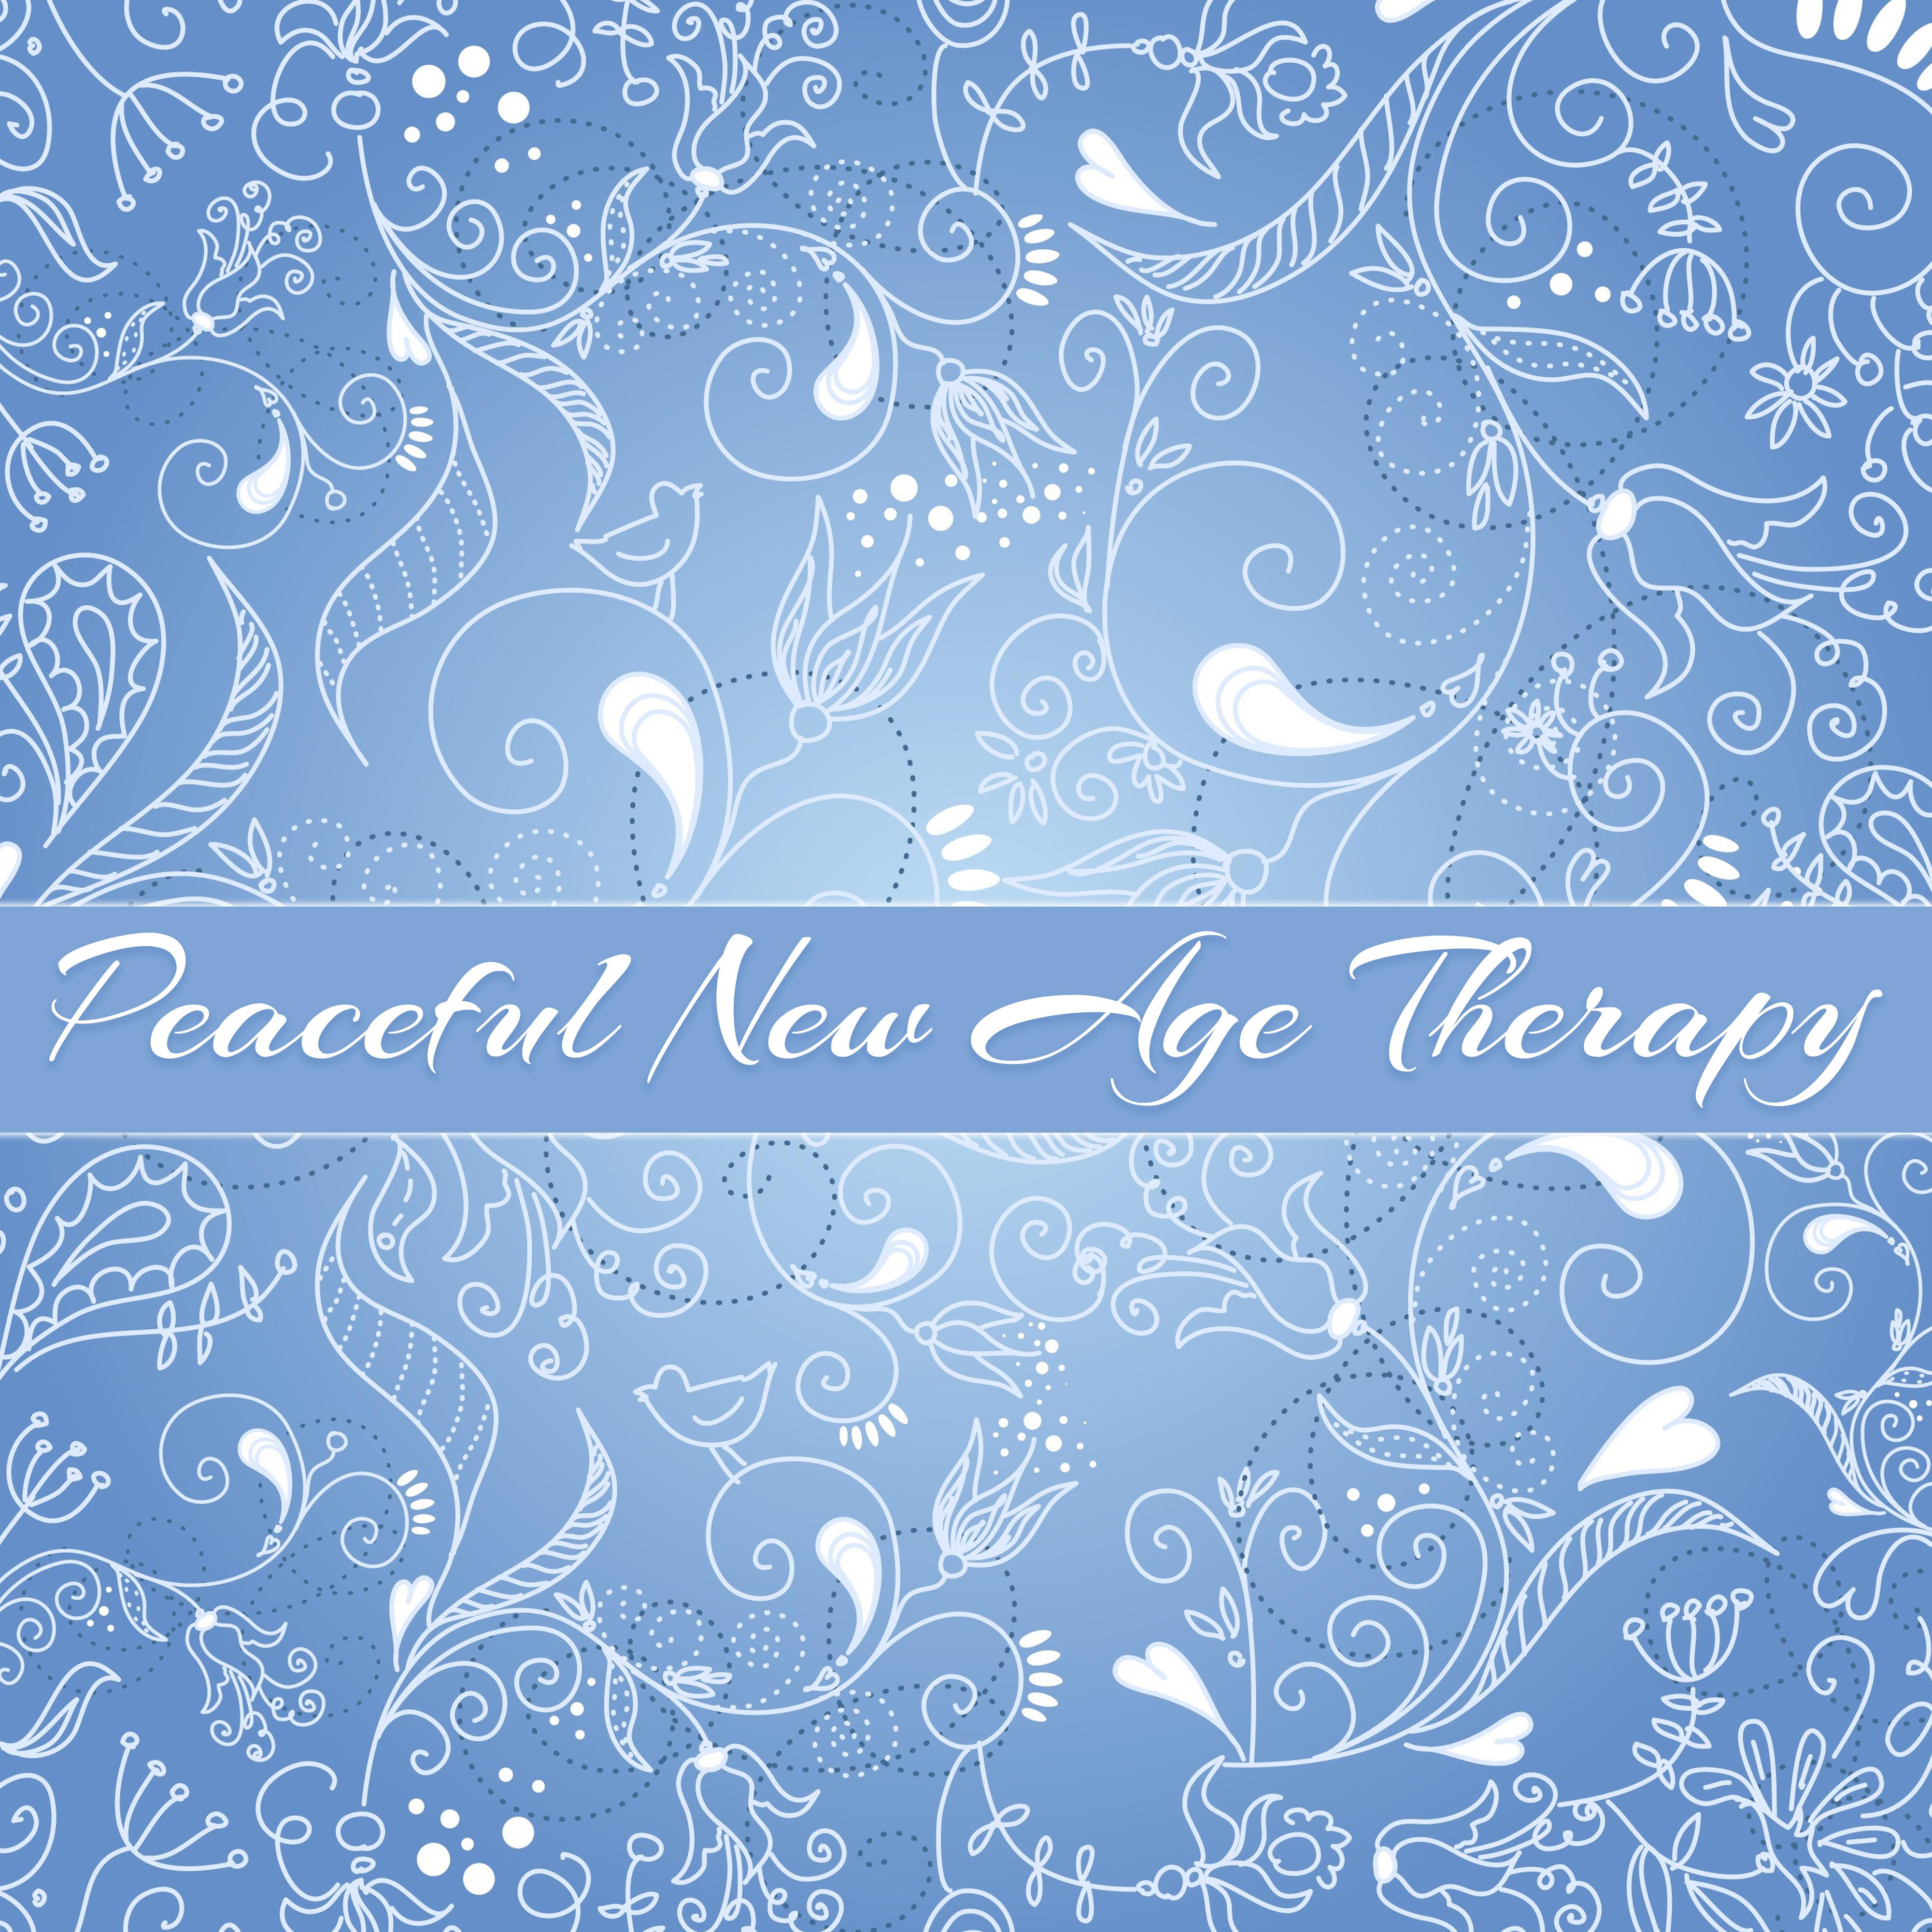 Peaceful New Age Therapy